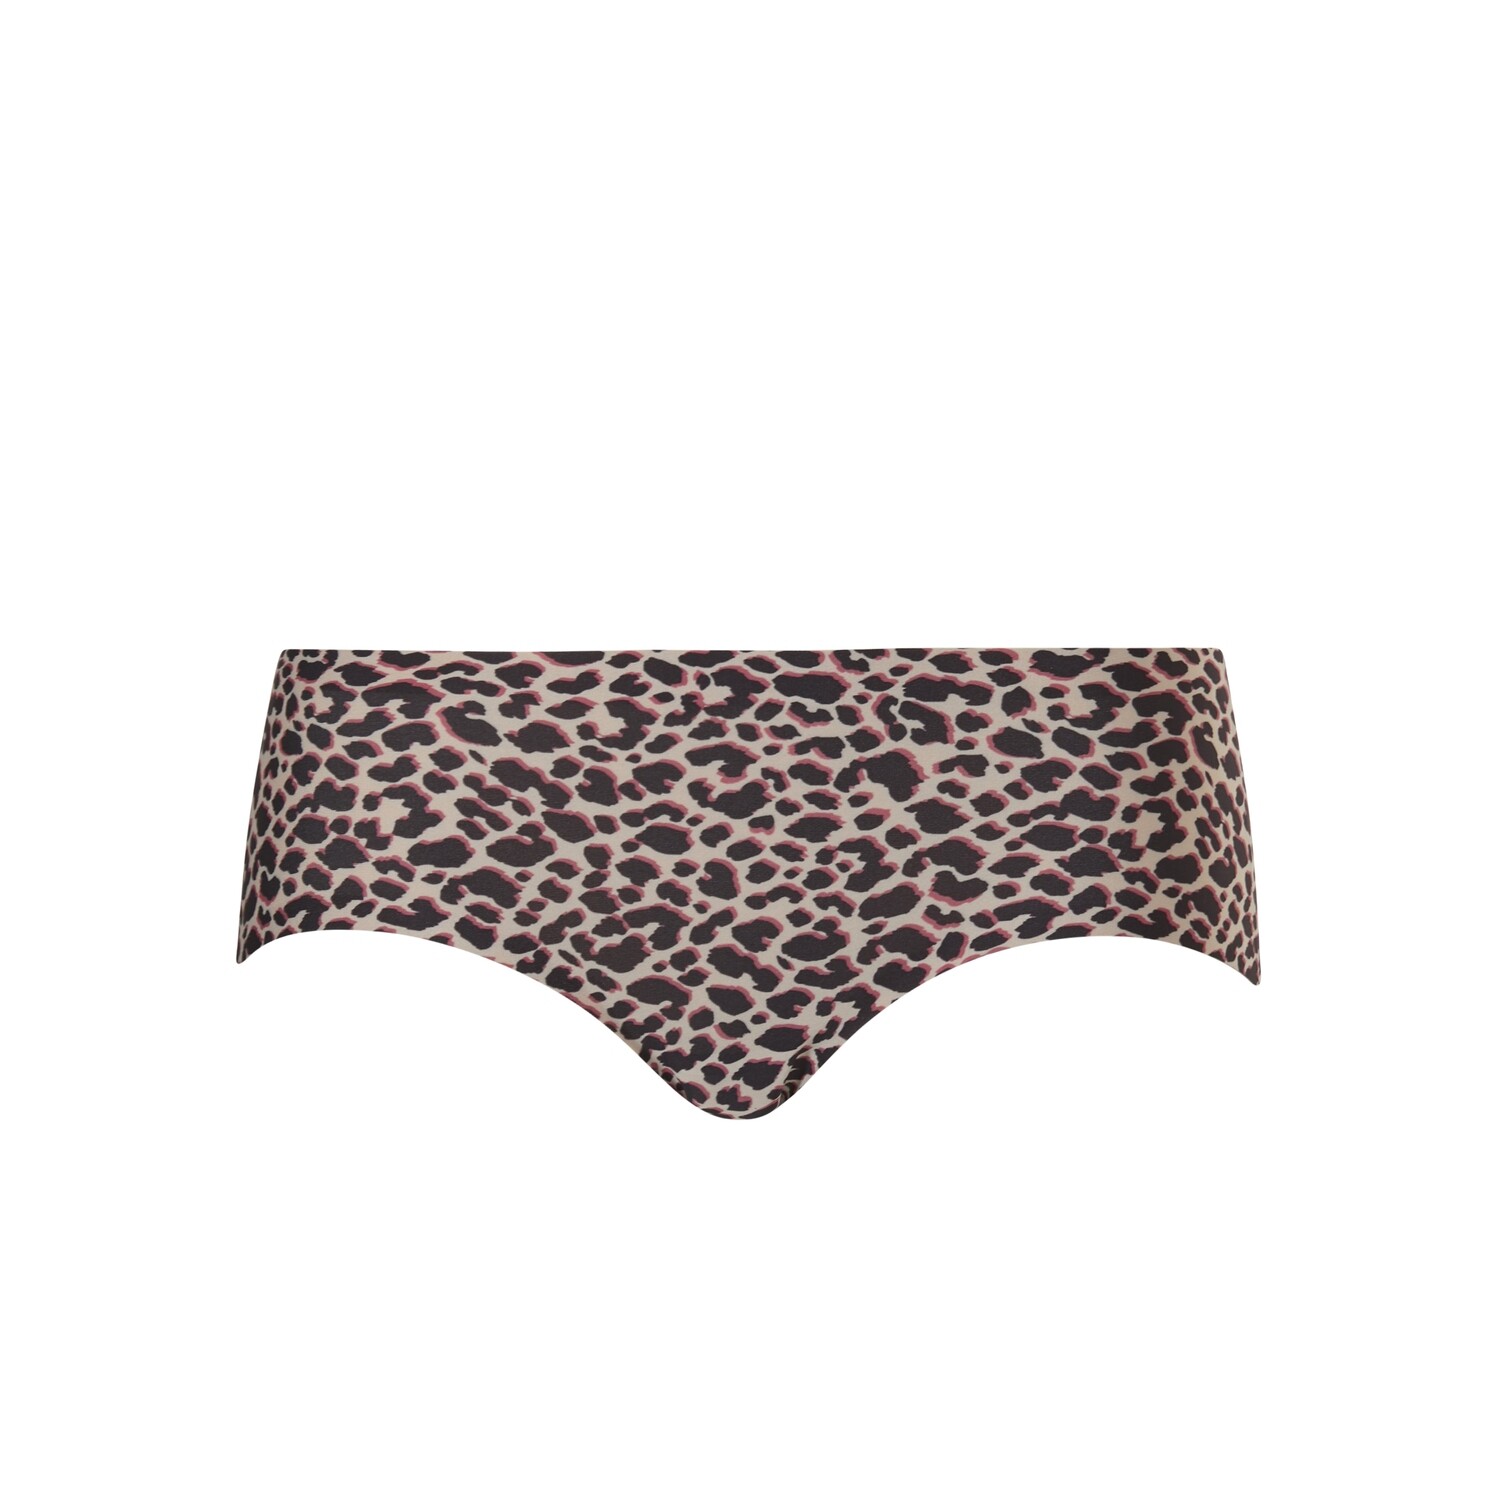 30175 - Ten Cate Secrets Hipster Panther